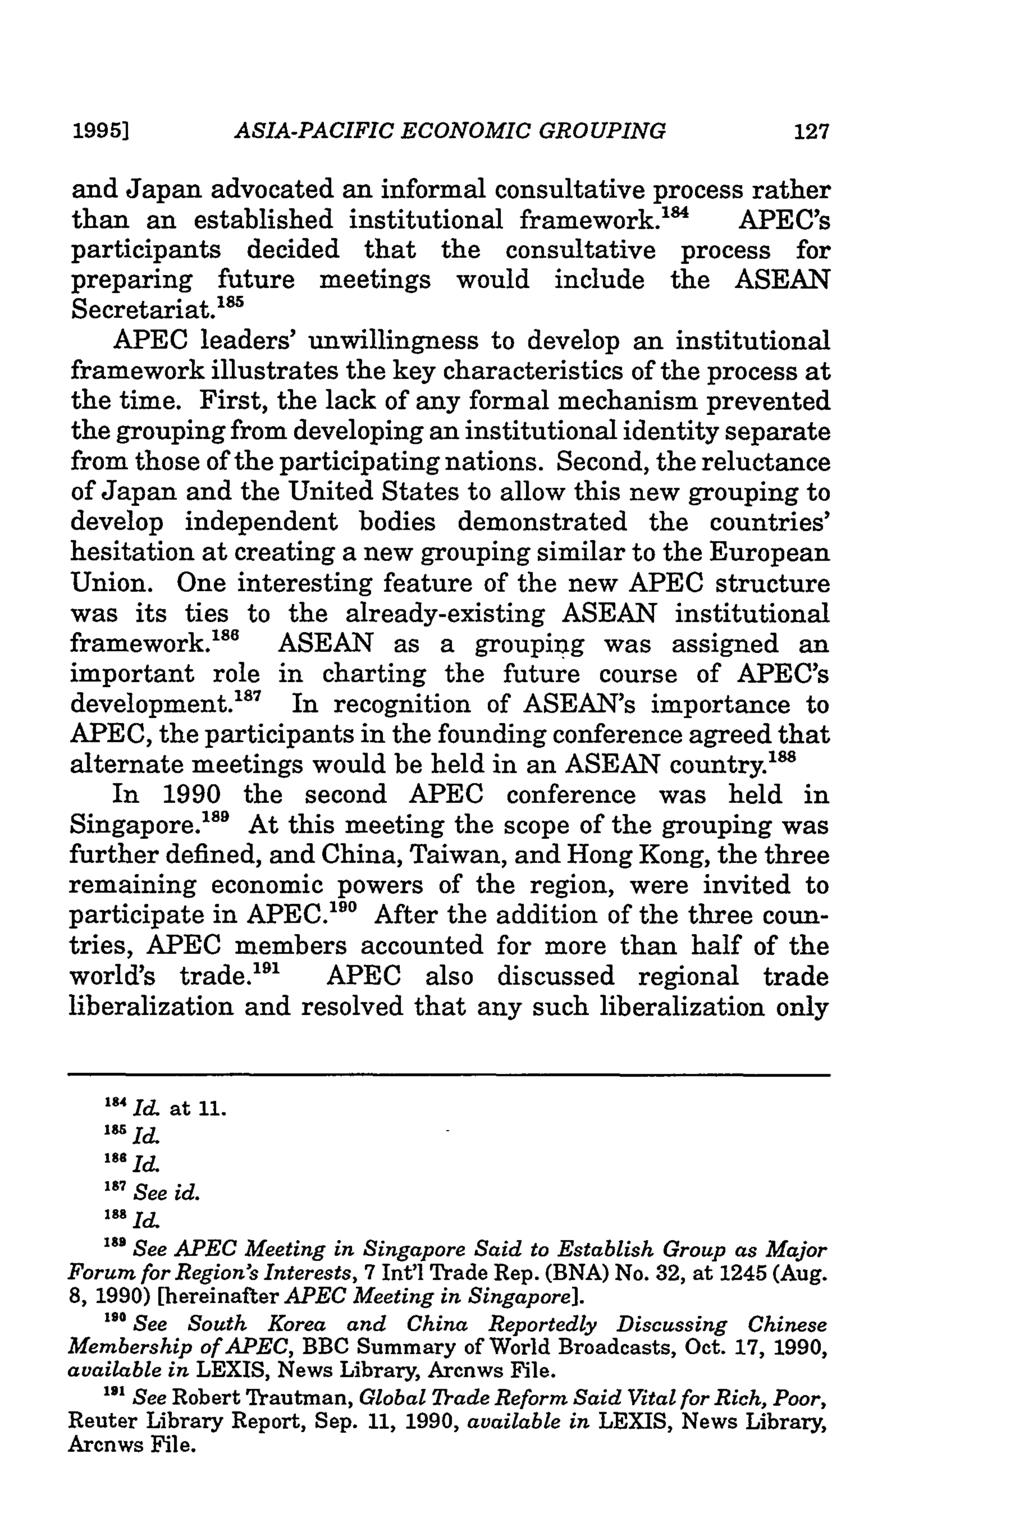 Dichter: Legal Implications of an Asia-Pacific Economic Grouping 1995] ASIA-PACIFIC ECONOMIC GROUPING and Japan advocated an informal consultative process rather than an established institutional